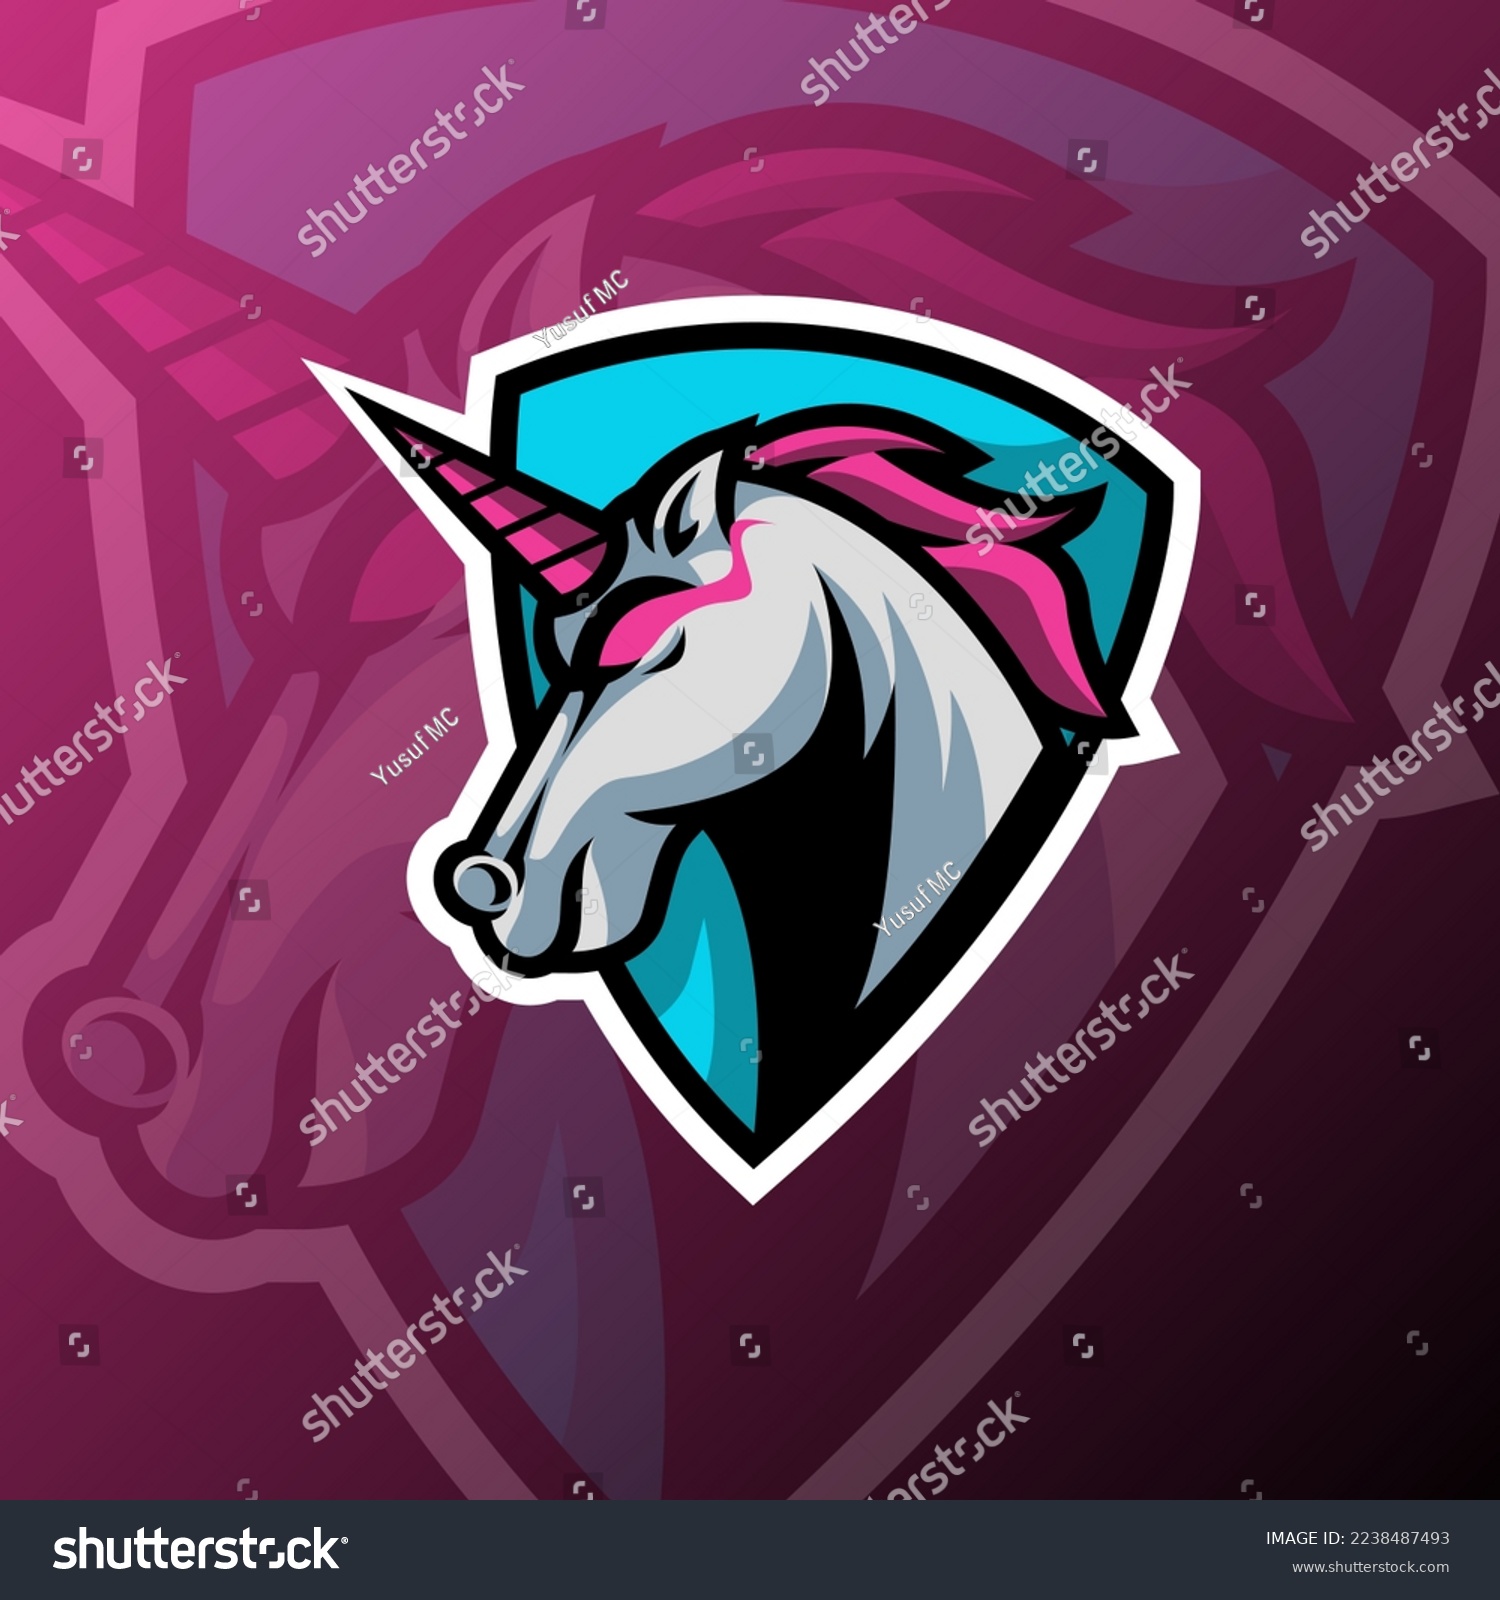 SVG of vector graphics illustration of a unicorn in esport logo style. perfect for game team or product logo svg